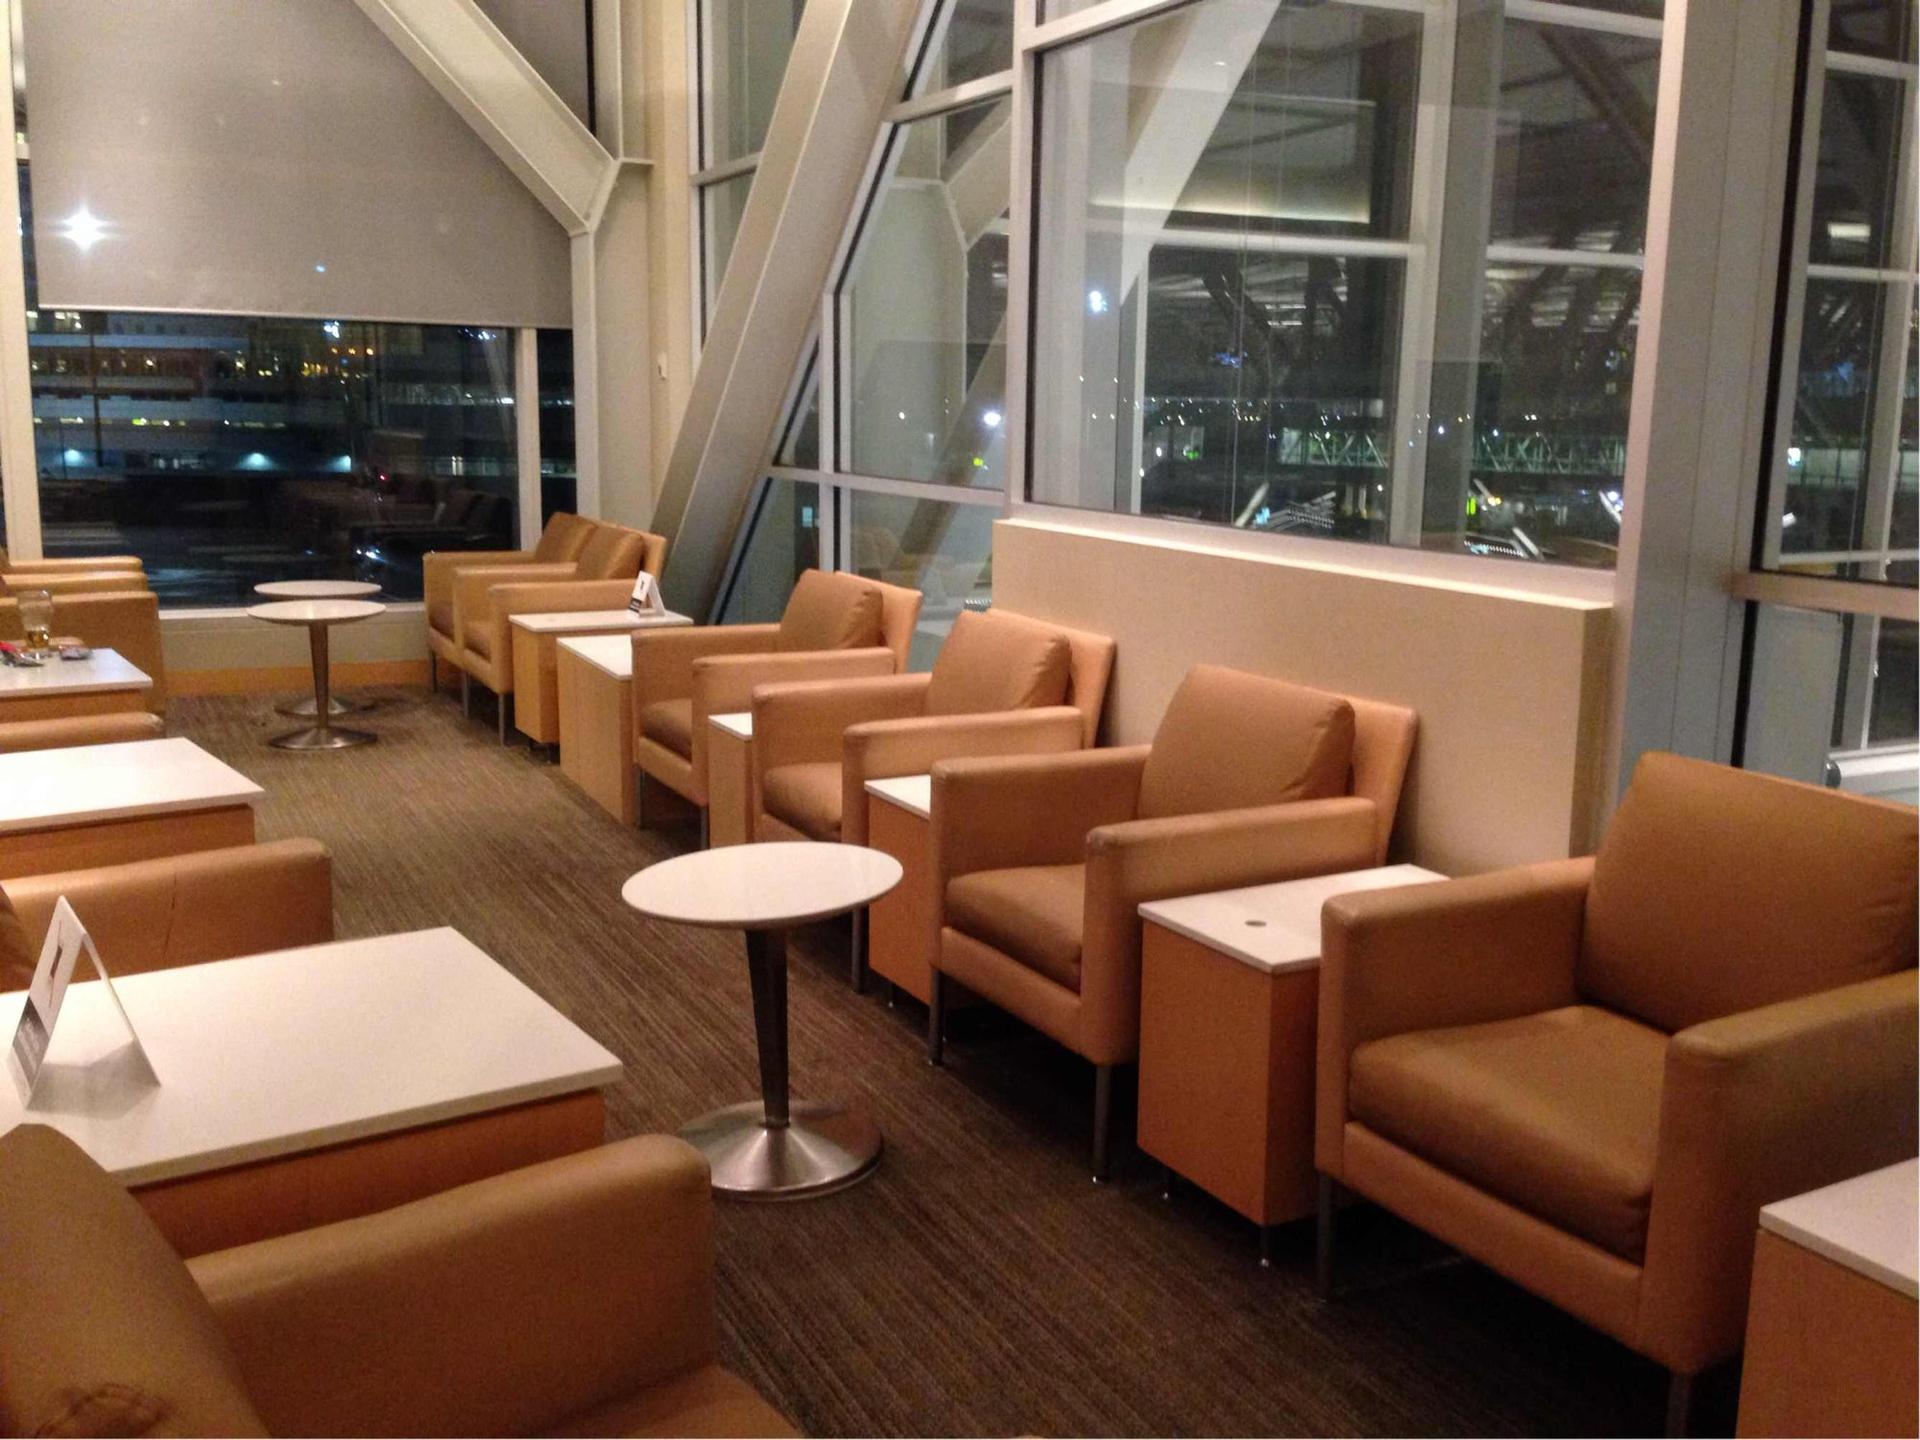 Air Canada Maple Leaf Lounge image 14 of 17